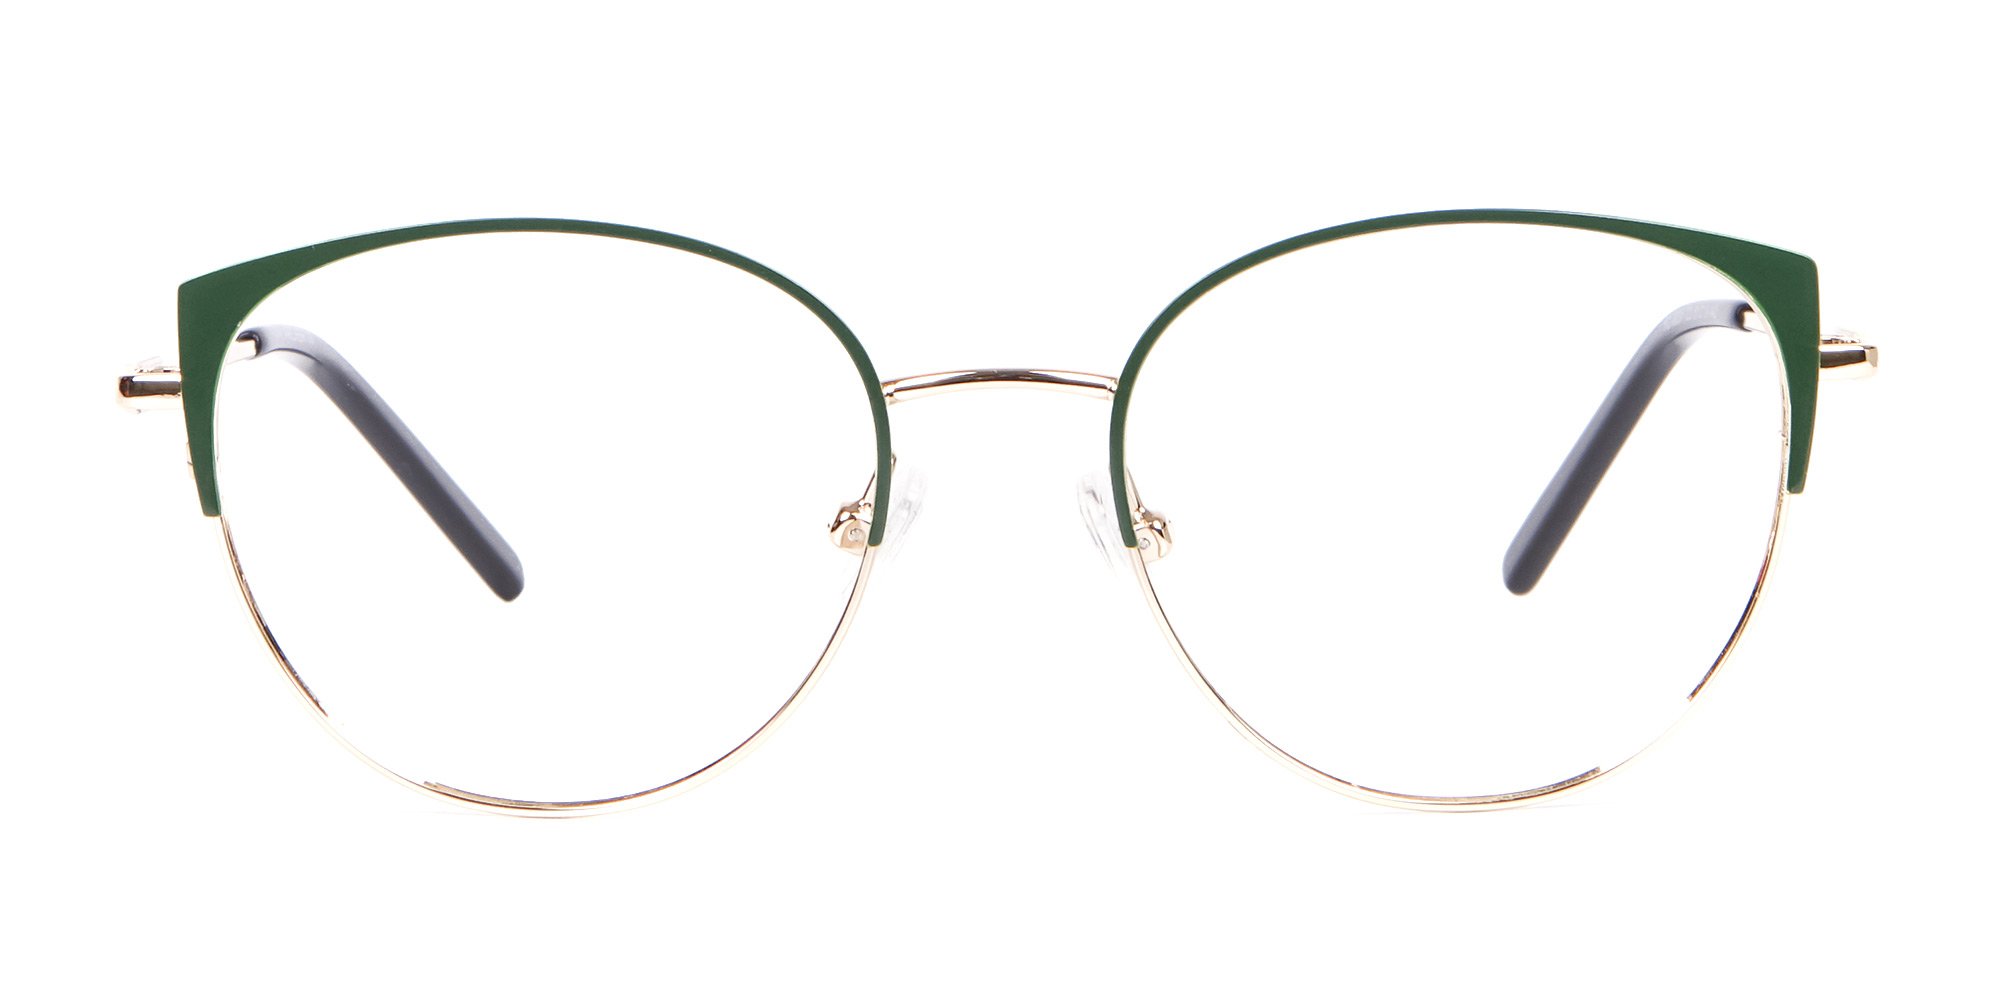 Gold and Hunter Green Metal Glasses in Round 2020 eyewear trends